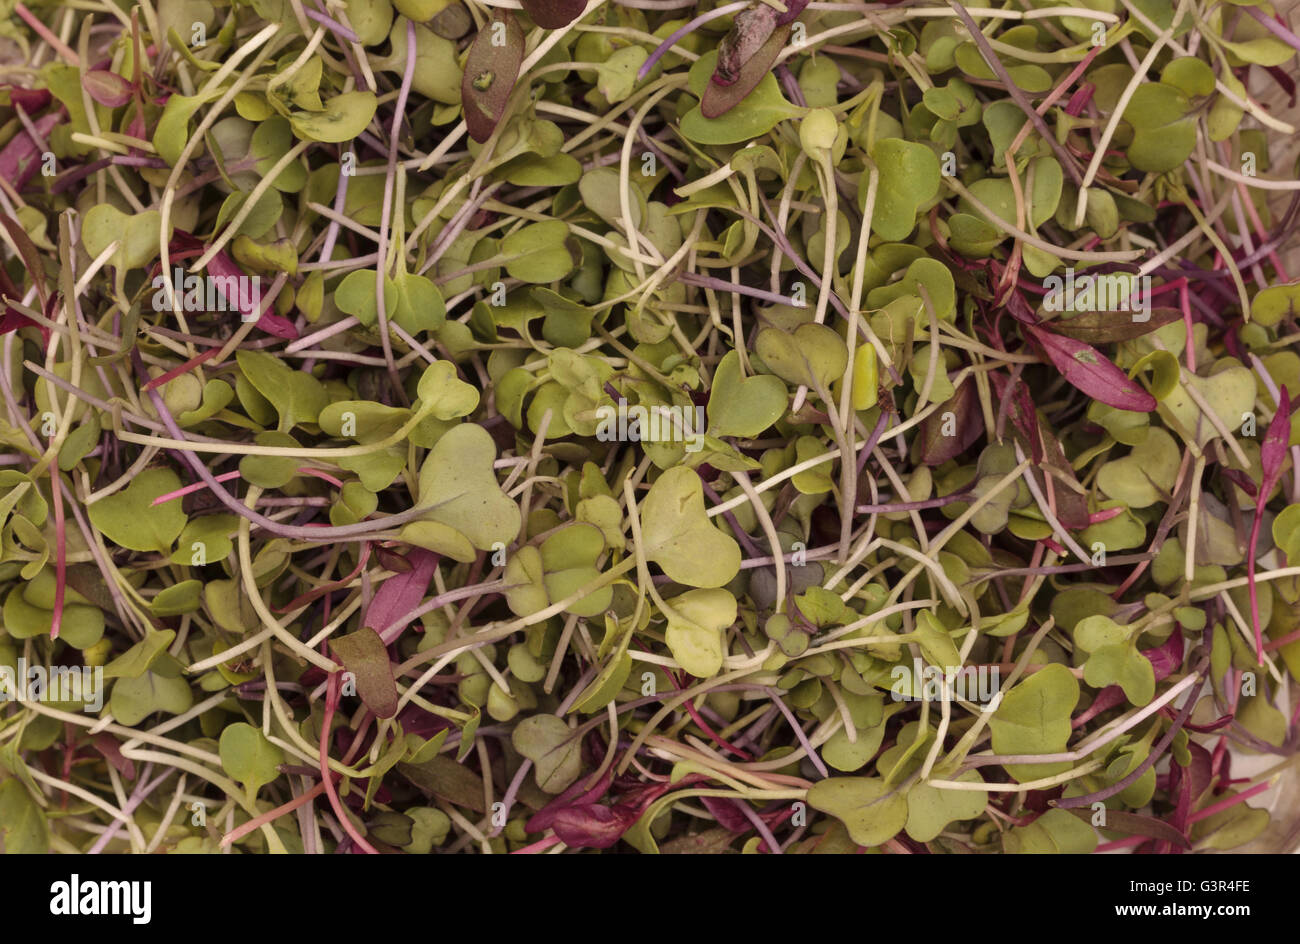 Mixed organic greens, including broccoli sprouts, background Stock Photo